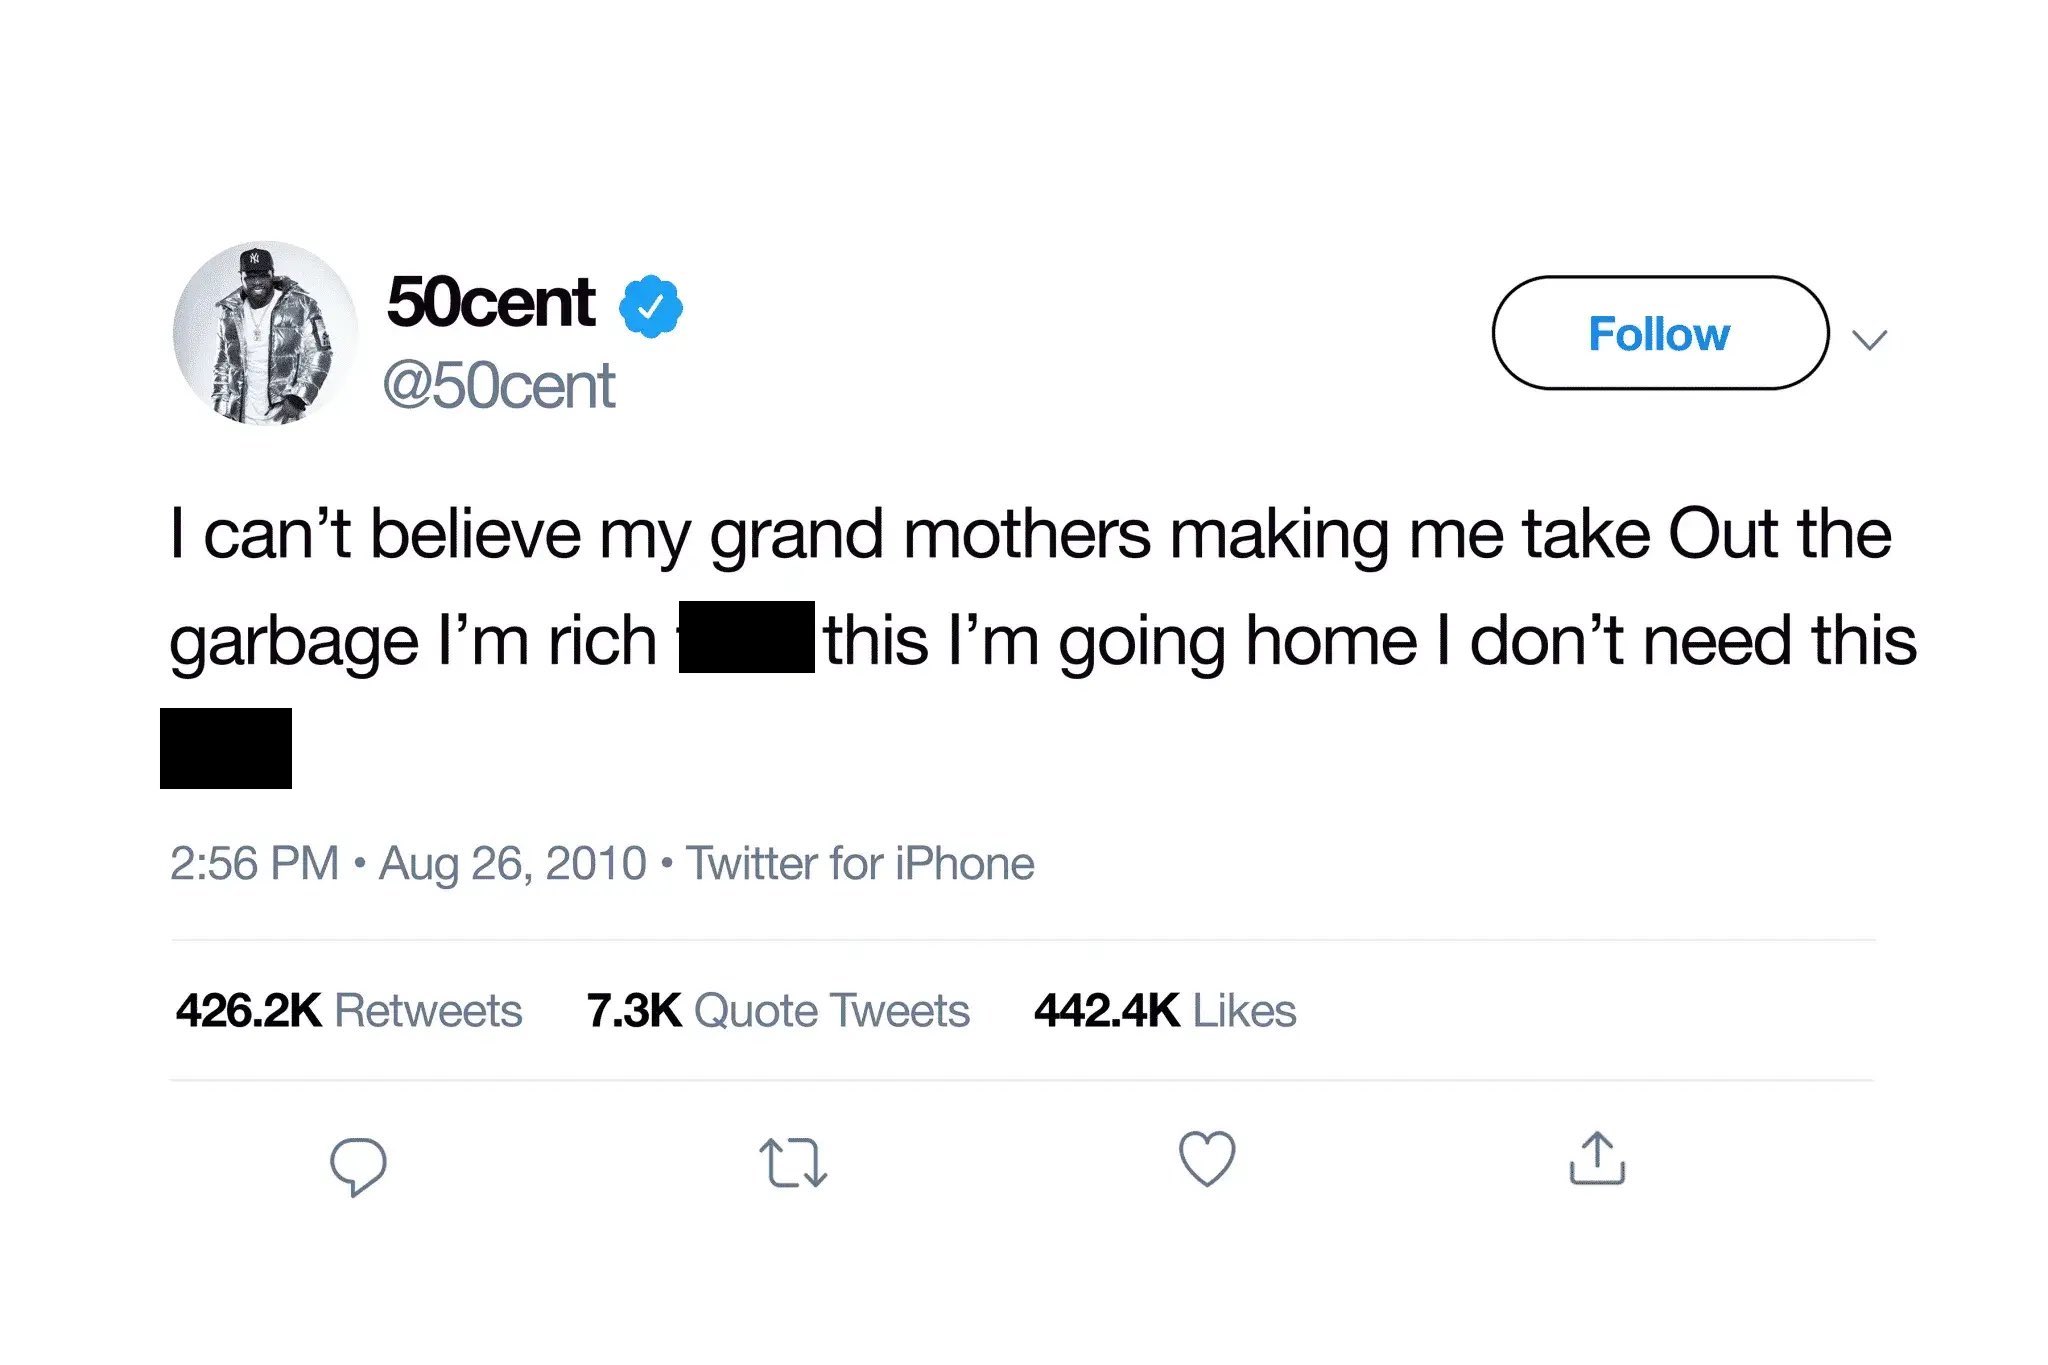 screenshot - 50cent I can't believe my grand mothers making me take Out the garbage I'm rich this I'm going home I don't need this . Twitter for iPhone Quote Tweets 27